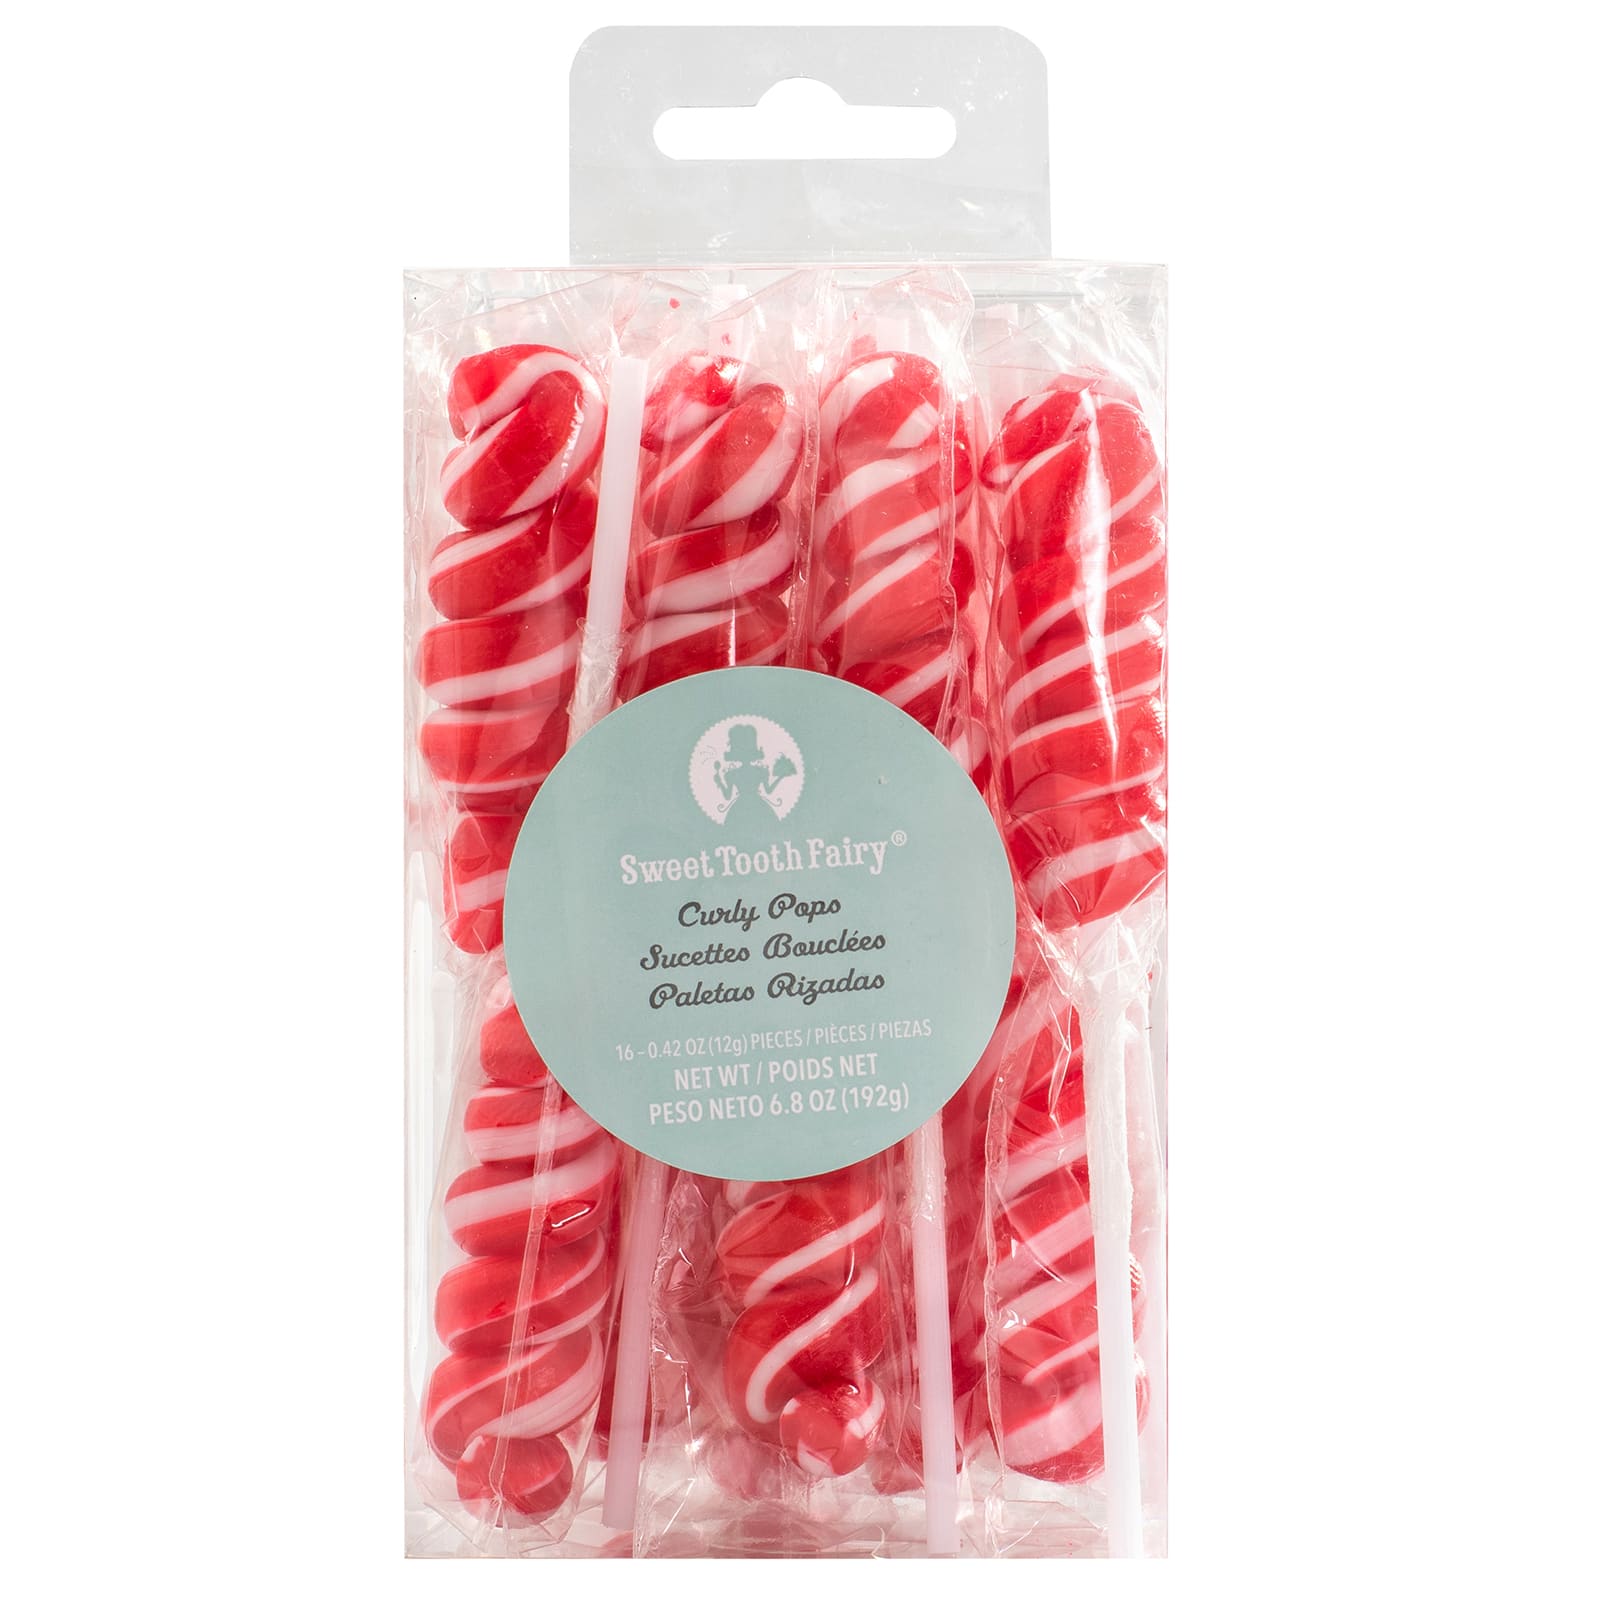 Buy The Sweet Tooth Fairy® Curly Pops Red At Michaels